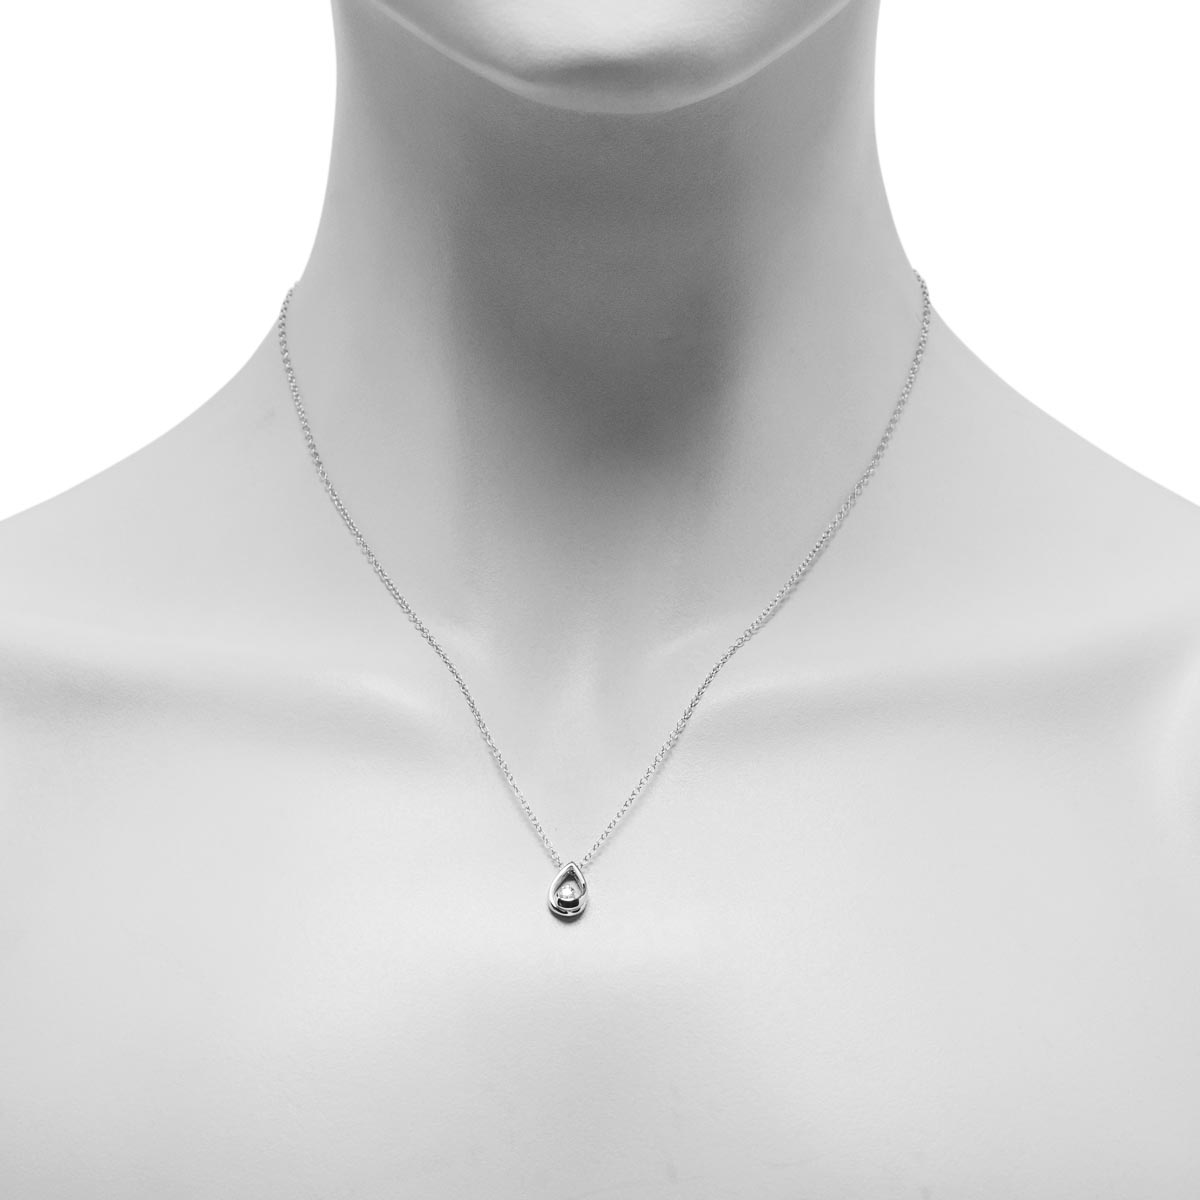 Northern Star Diamond Embrace Collection Necklace in Sterling Silver (1/10ct)